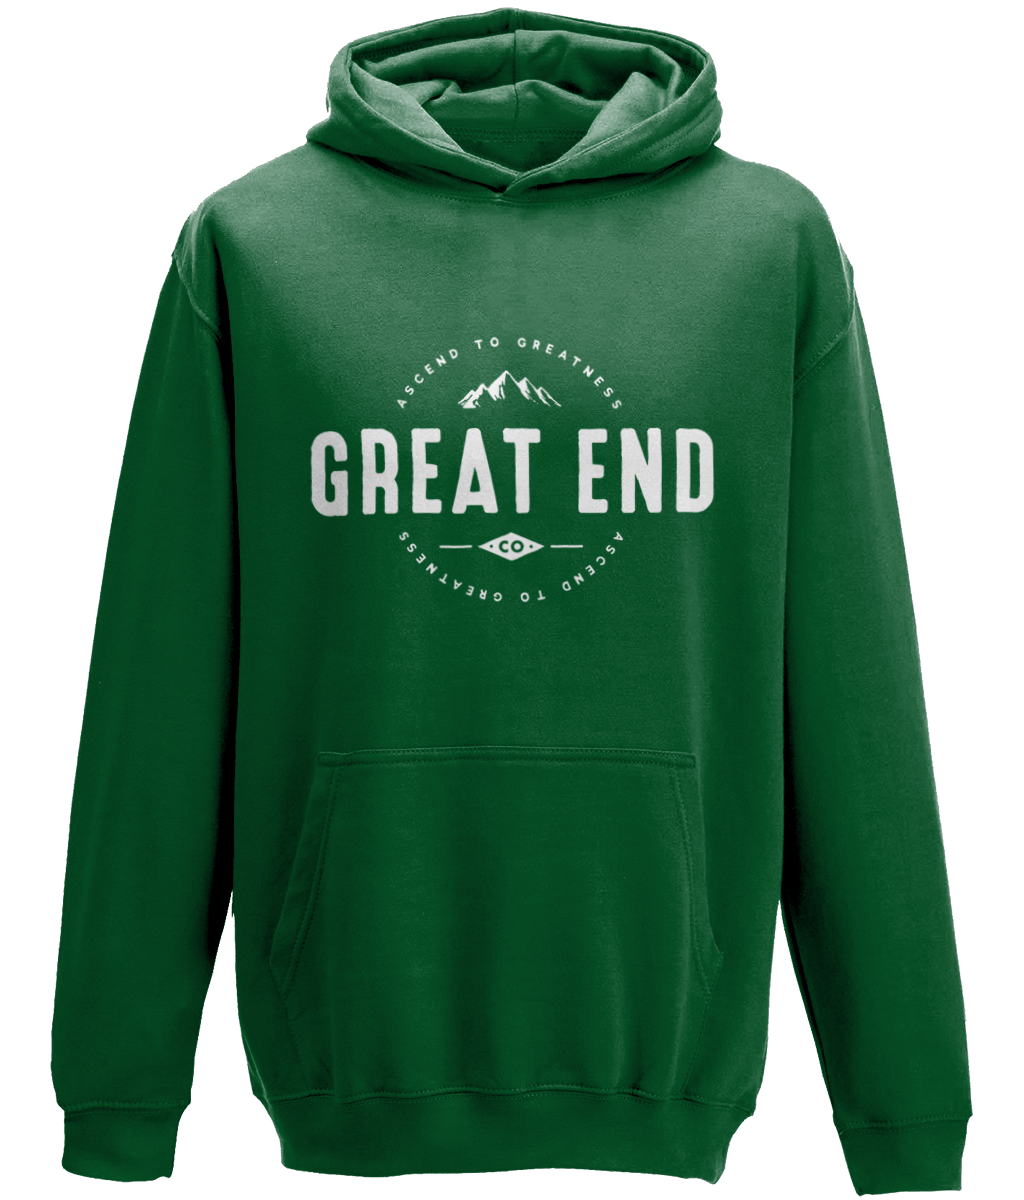 Bottle Green Logo - Bottle Green Hoodie with White Great End Logo End Co